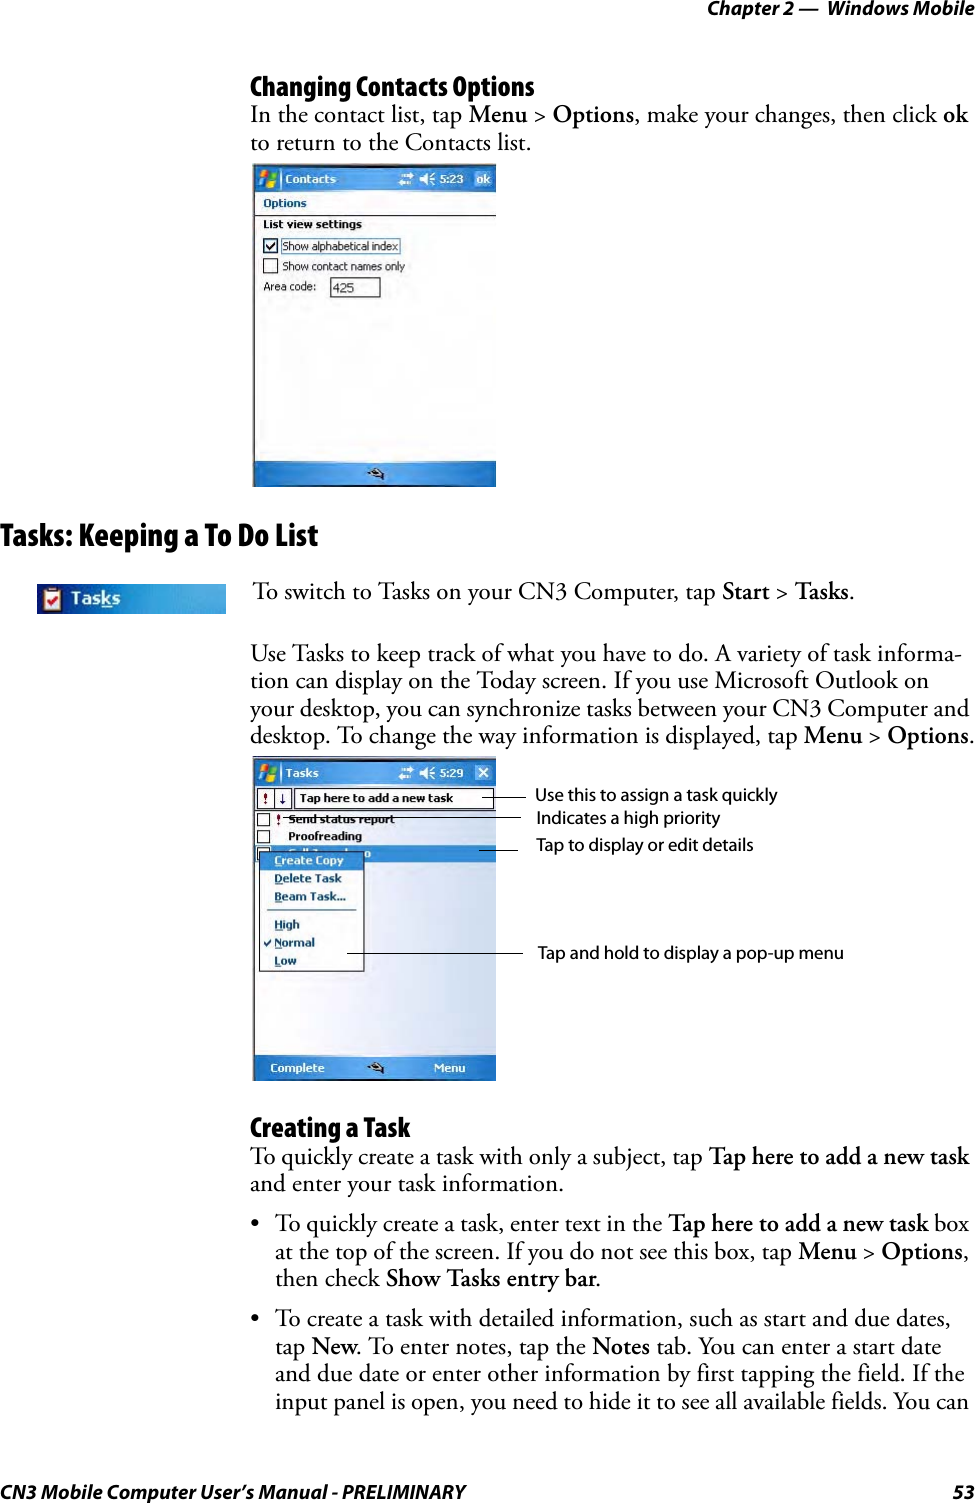 Chapter 2 —  Windows MobileCN3 Mobile Computer User’s Manual - PRELIMINARY 53Changing Contacts OptionsIn the contact list, tap Menu &gt; Options, make your changes, then click ok to return to the Contacts list.Tasks: Keeping a To Do ListUse Tasks to keep track of what you have to do. A variety of task informa-tion can display on the Today screen. If you use Microsoft Outlook on your desktop, you can synchronize tasks between your CN3 Computer and desktop. To change the way information is displayed, tap Menu &gt; Options.Creating a TaskTo quickly create a task with only a subject, tap Tap here to add a new task and enter your task information.• To quickly create a task, enter text in the Tap here to add a new task box at the top of the screen. If you do not see this box, tap Menu &gt; Options, then check Show Tasks entry bar.• To create a task with detailed information, such as start and due dates, tap New. To enter notes, tap the Notes tab. You can enter a start date and due date or enter other information by first tapping the field. If the input panel is open, you need to hide it to see all available fields. You can To switch to Tasks on your CN3 Computer, tap Start &gt; Tasks.Use this to assign a task quicklyIndicates a high priorityTap to display or edit detailsTap and hold to display a pop-up menu